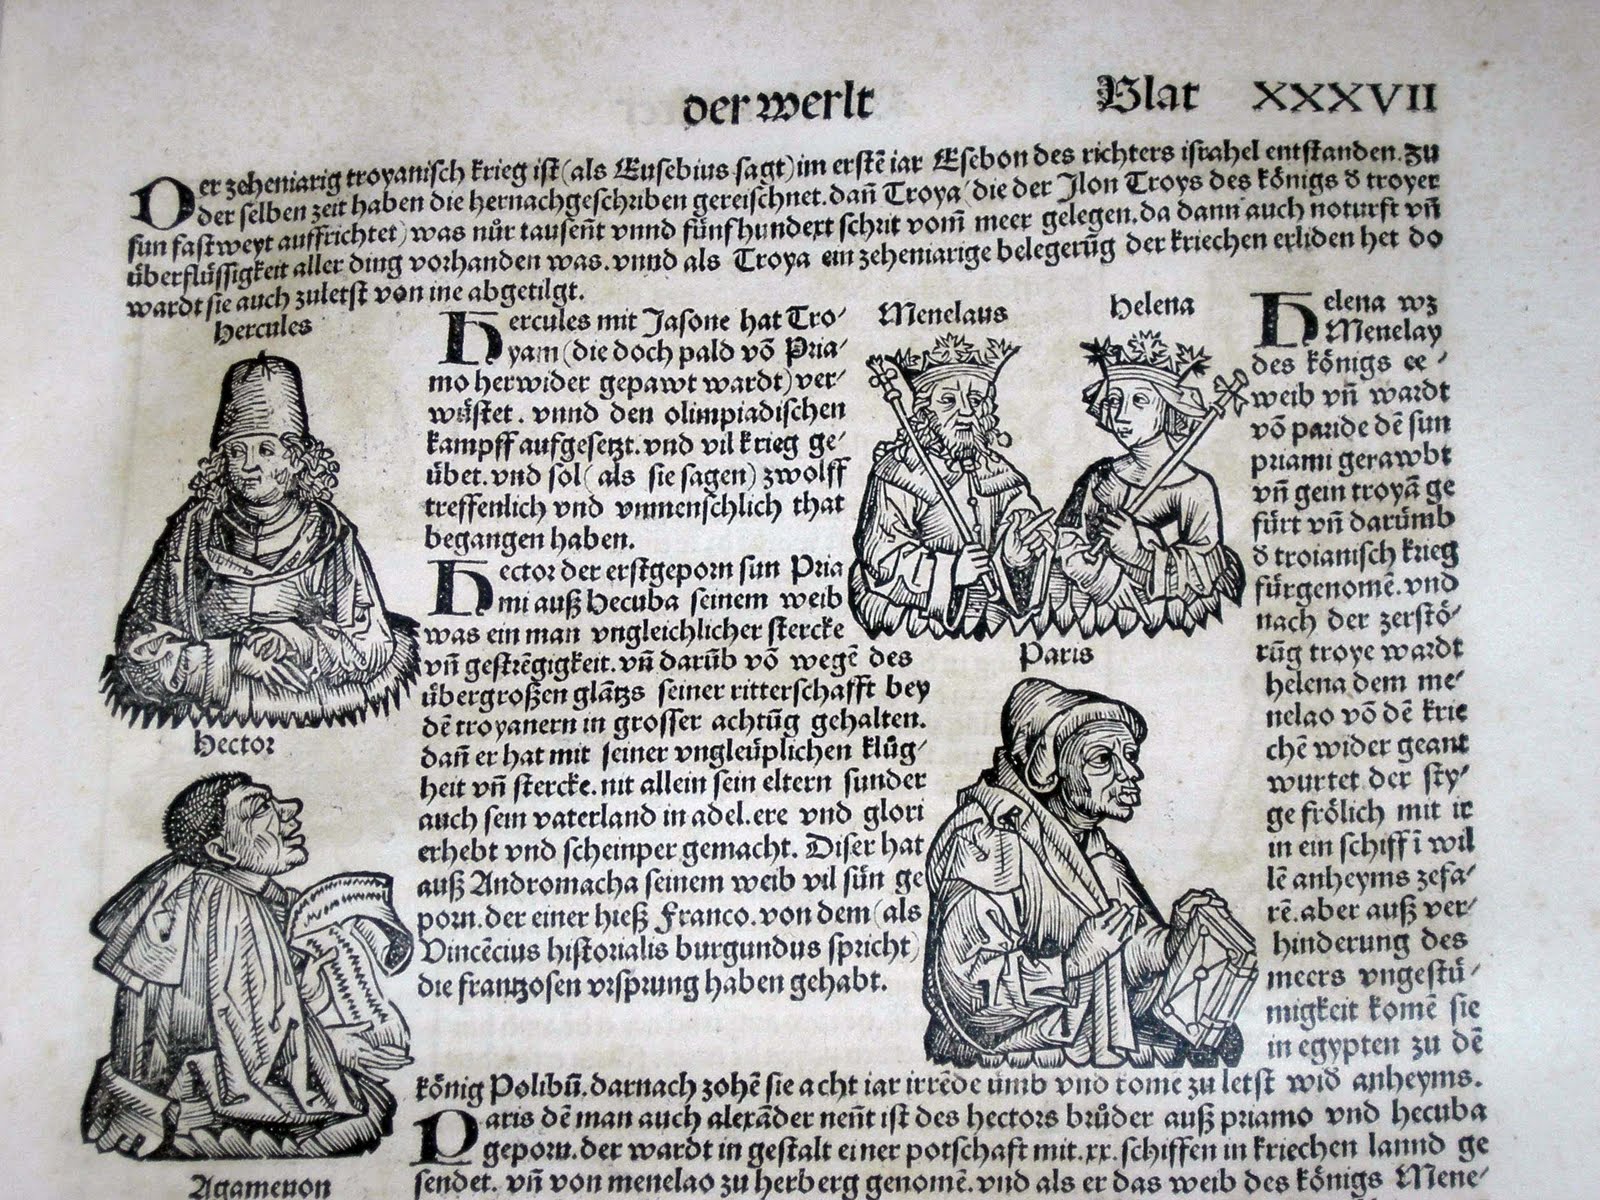 Page from the Latin edition of The Nuremberg Chronicles containing illustrations of Hercules, Hector, Menelaus, Helena and Paris